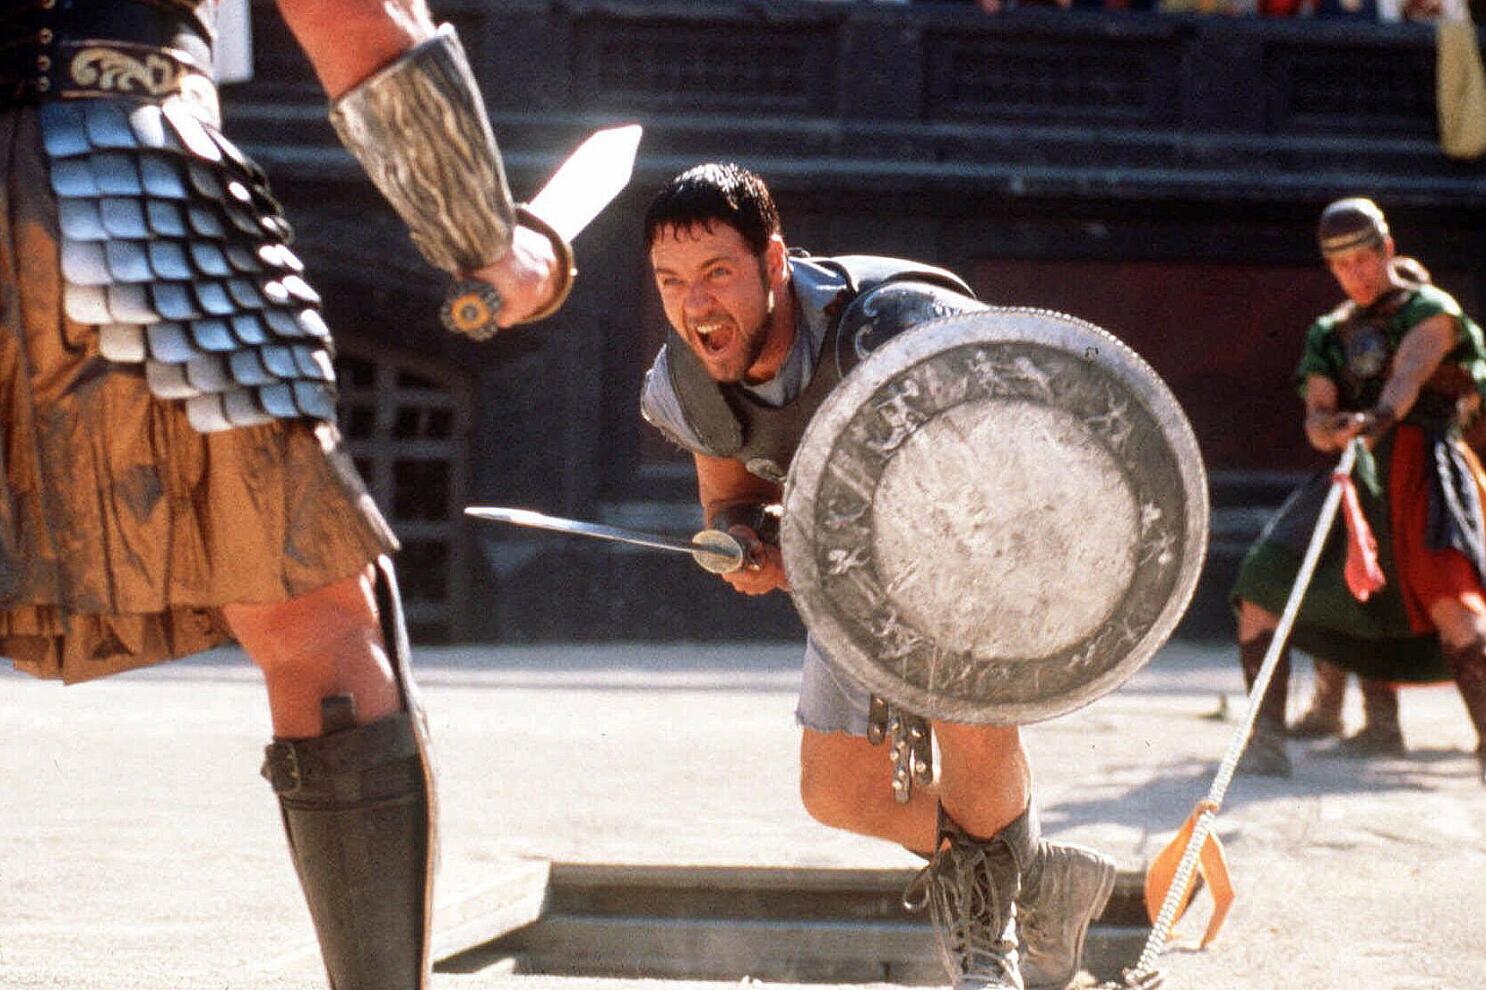 Gladiator 2 cast list: Pedro Pascal, Paul Mescal, and others to